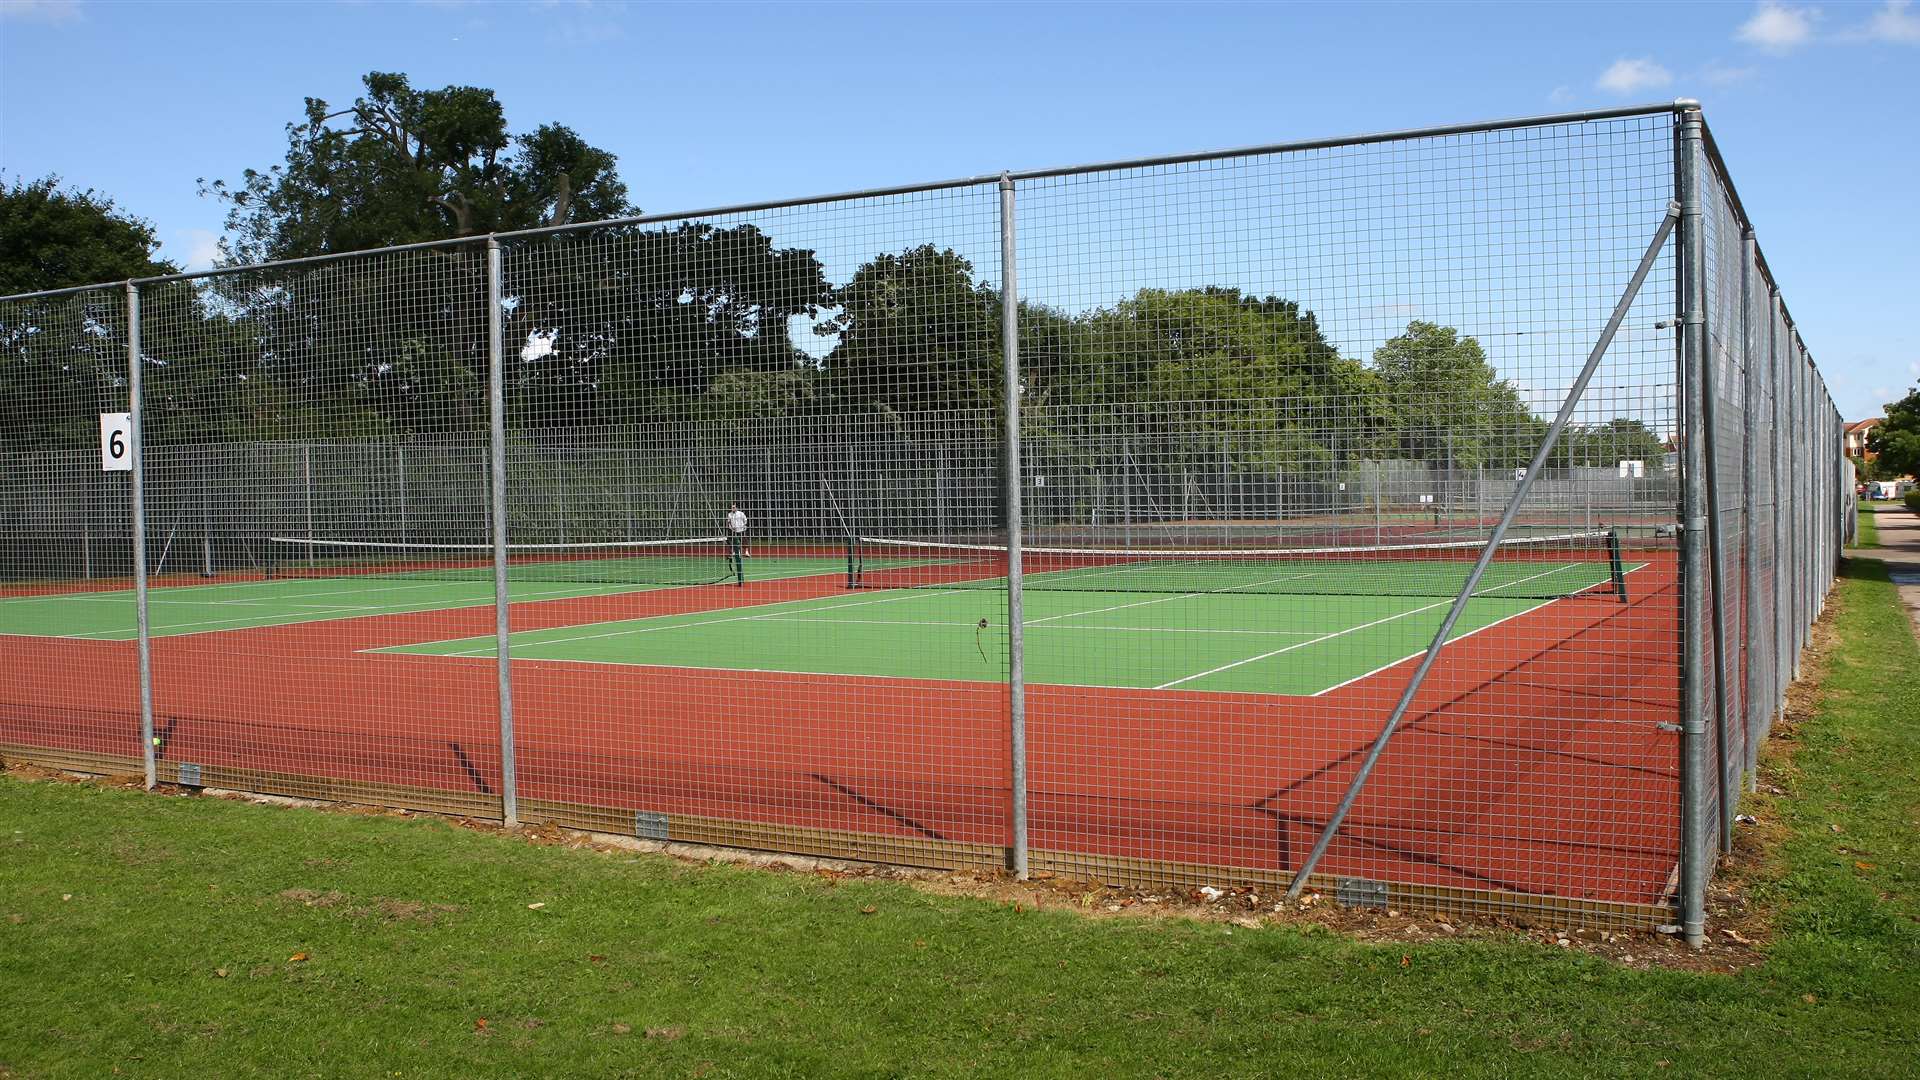 The tennis courts were resurfaced in 2014 at a cost of £30,000